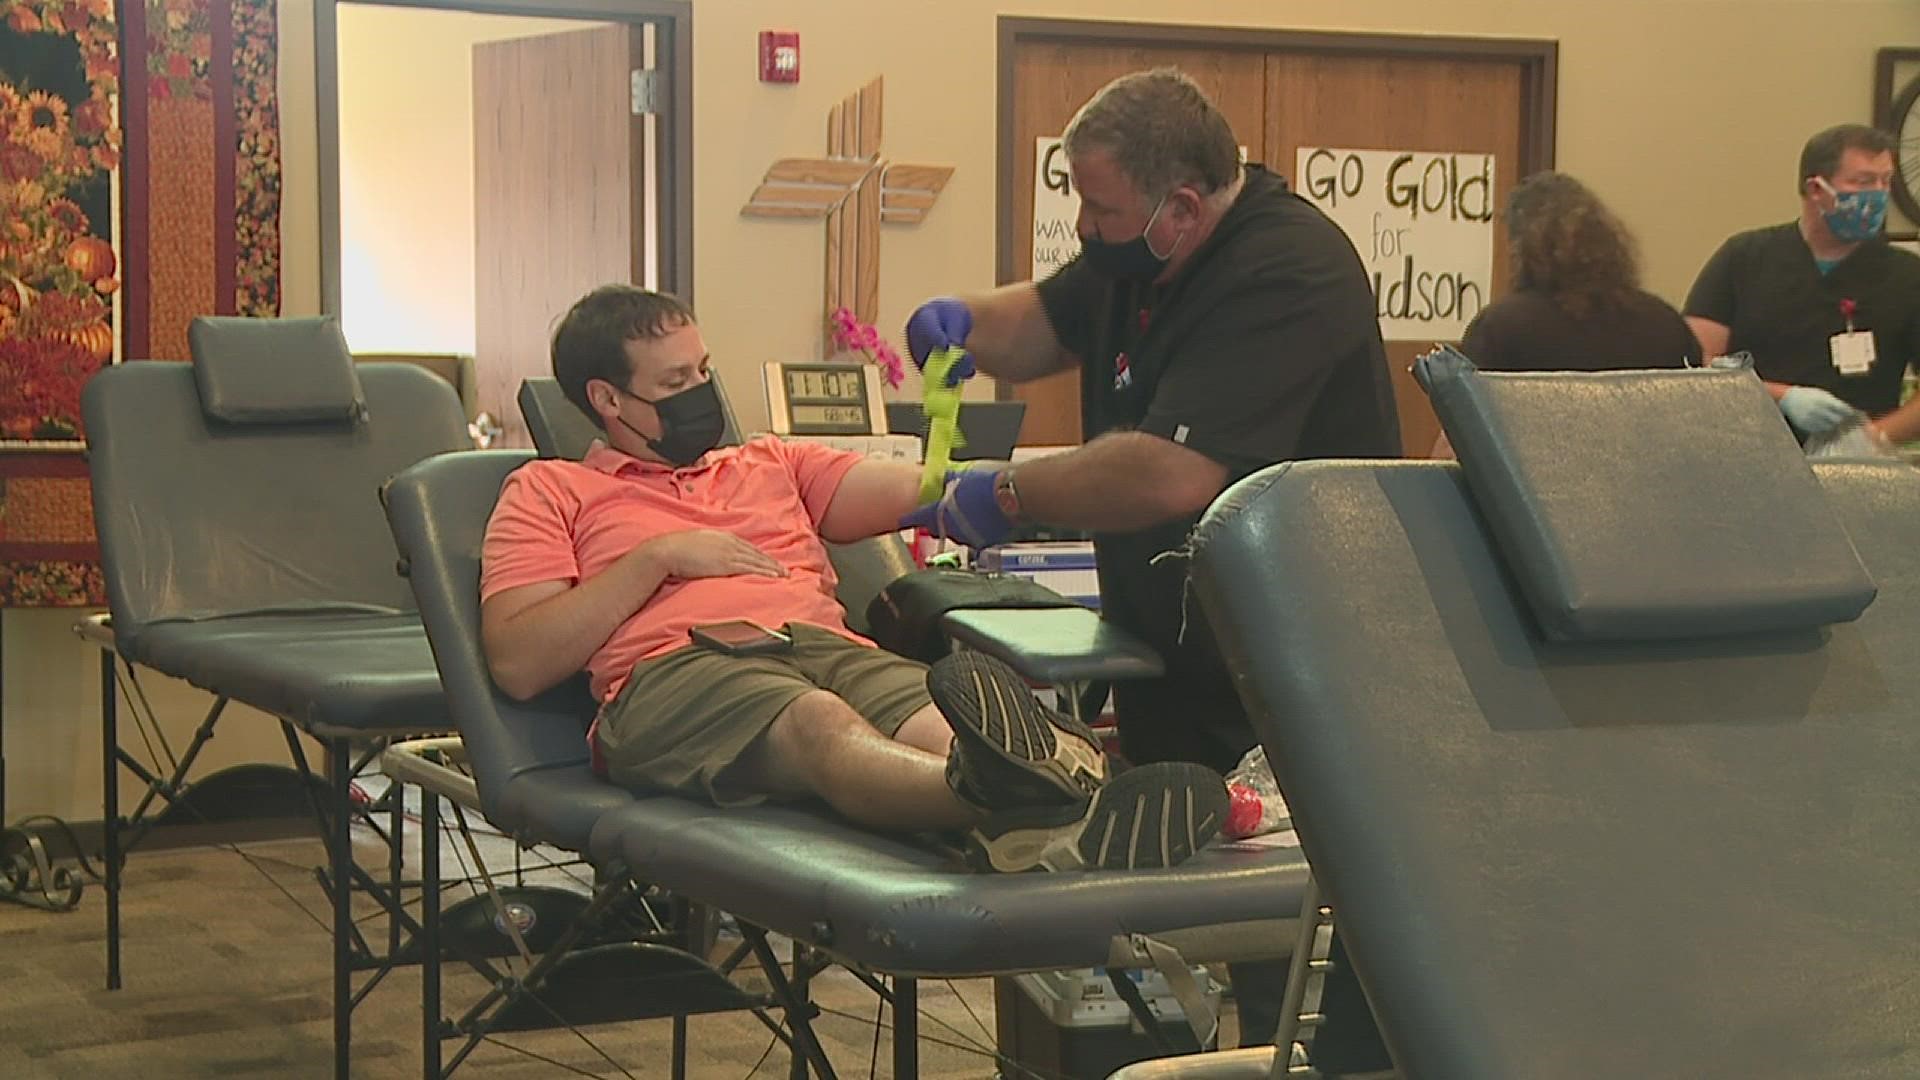 Over 70 people signed up to donate blood in Eldridge on Saturday, donating enough for to save more than 200 lives.